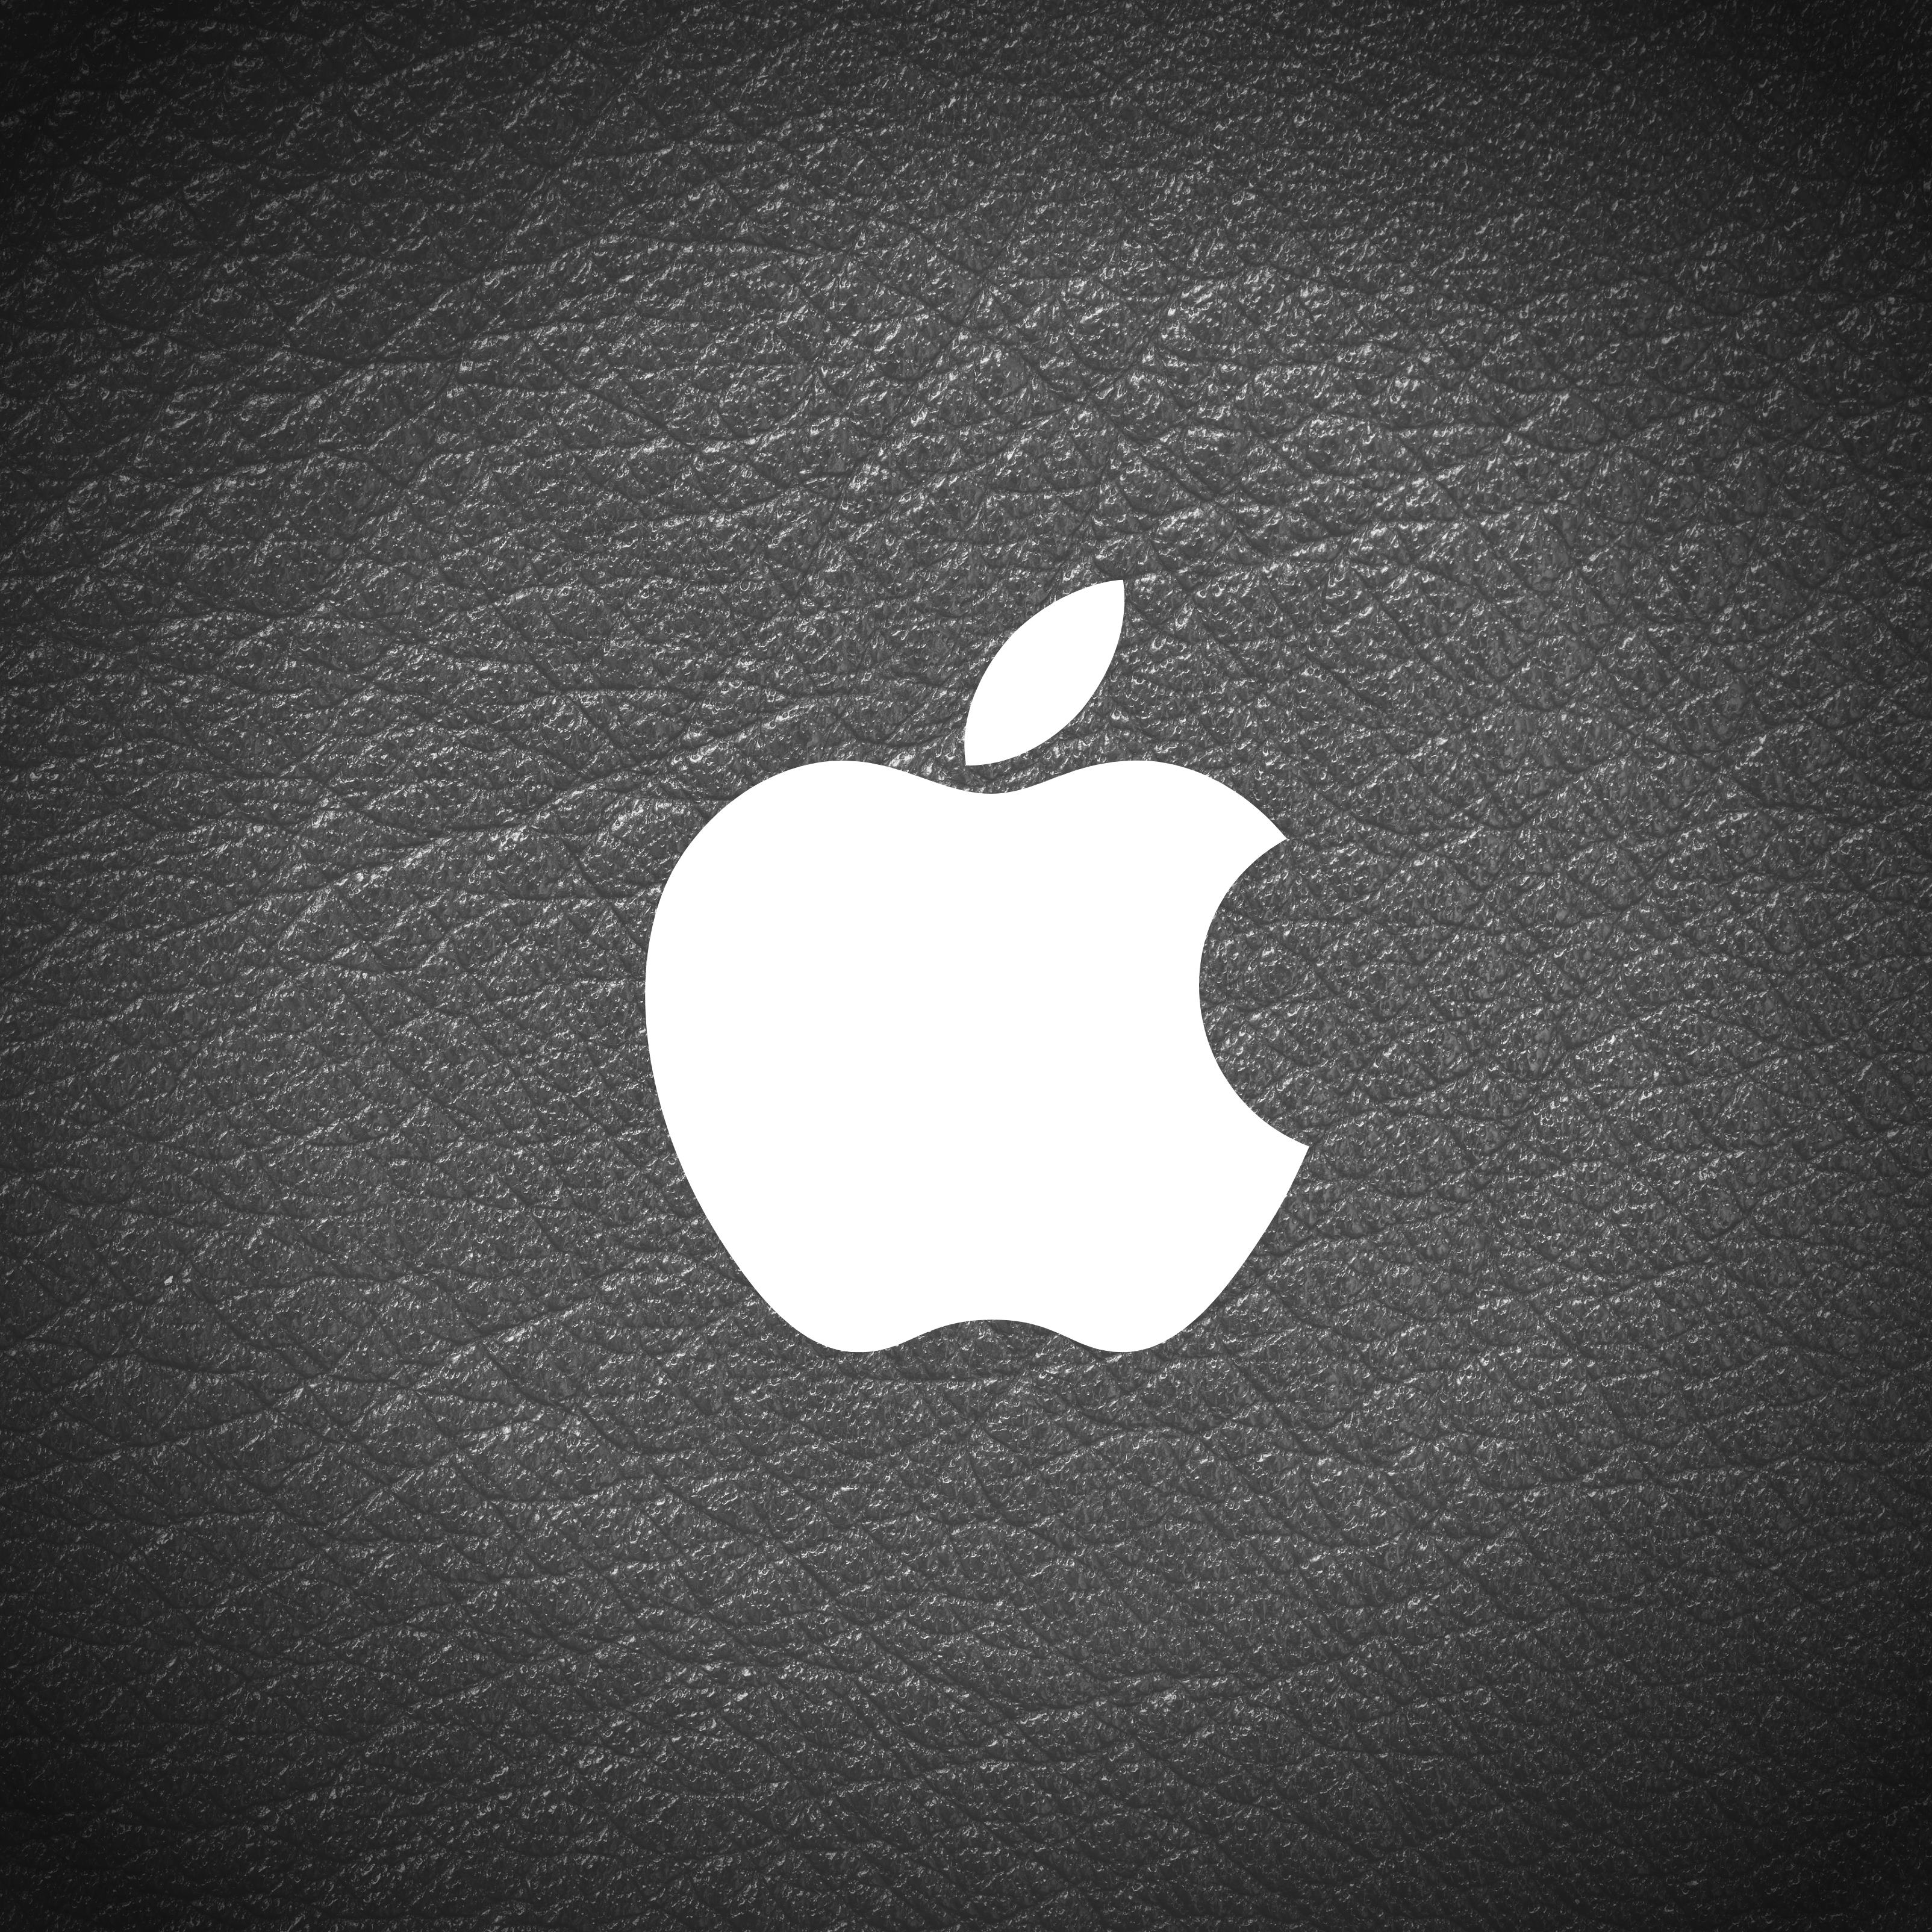 iPad backgrounds Apple Logo Leather Black and White iPad Wallpaper